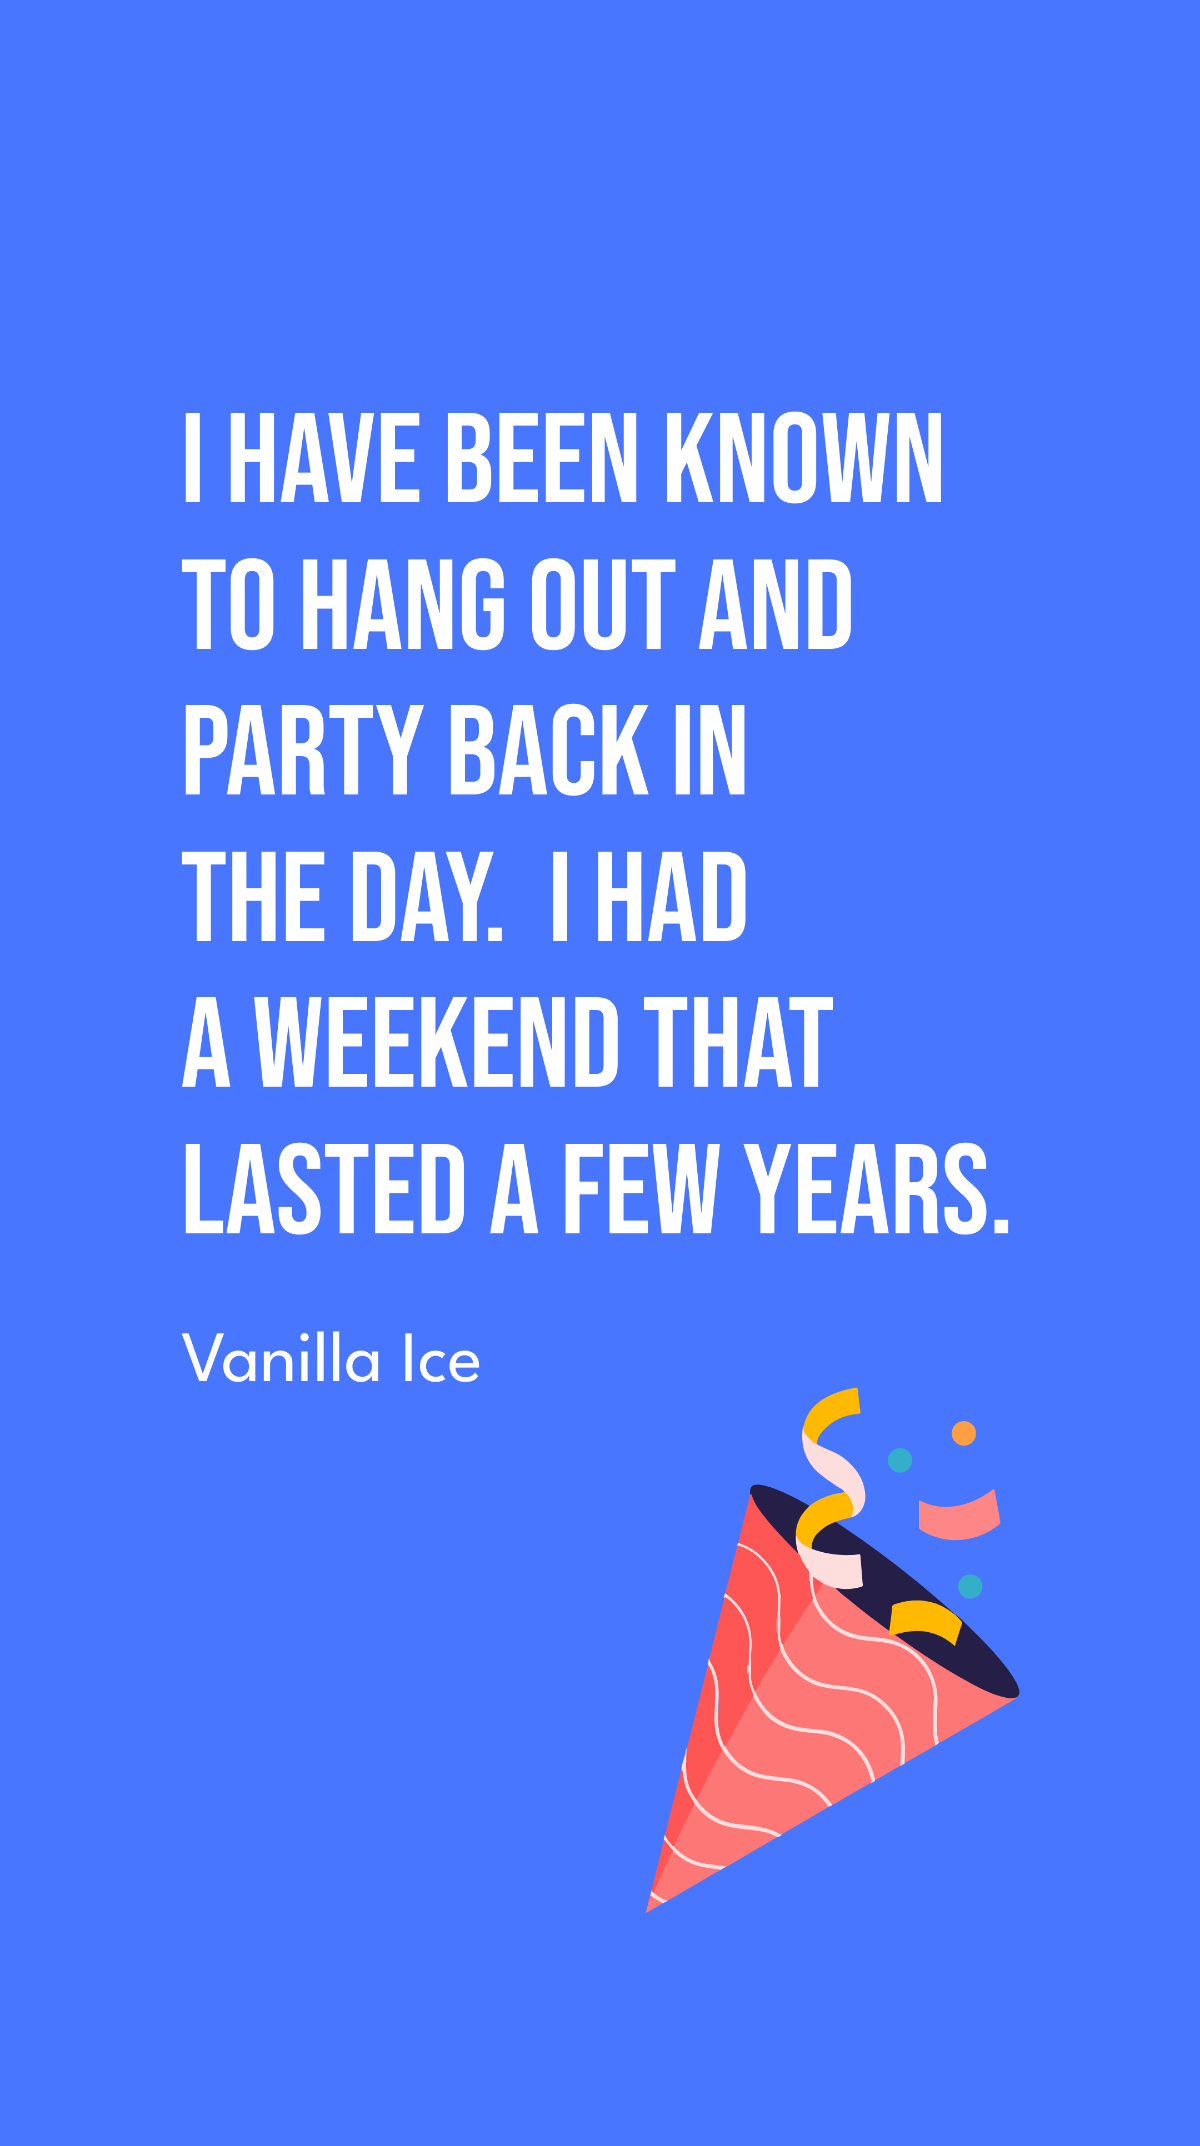 Vanilla Ice - I have been known to hang out and party back in the day. I had a weekend that lasted a few years. Template